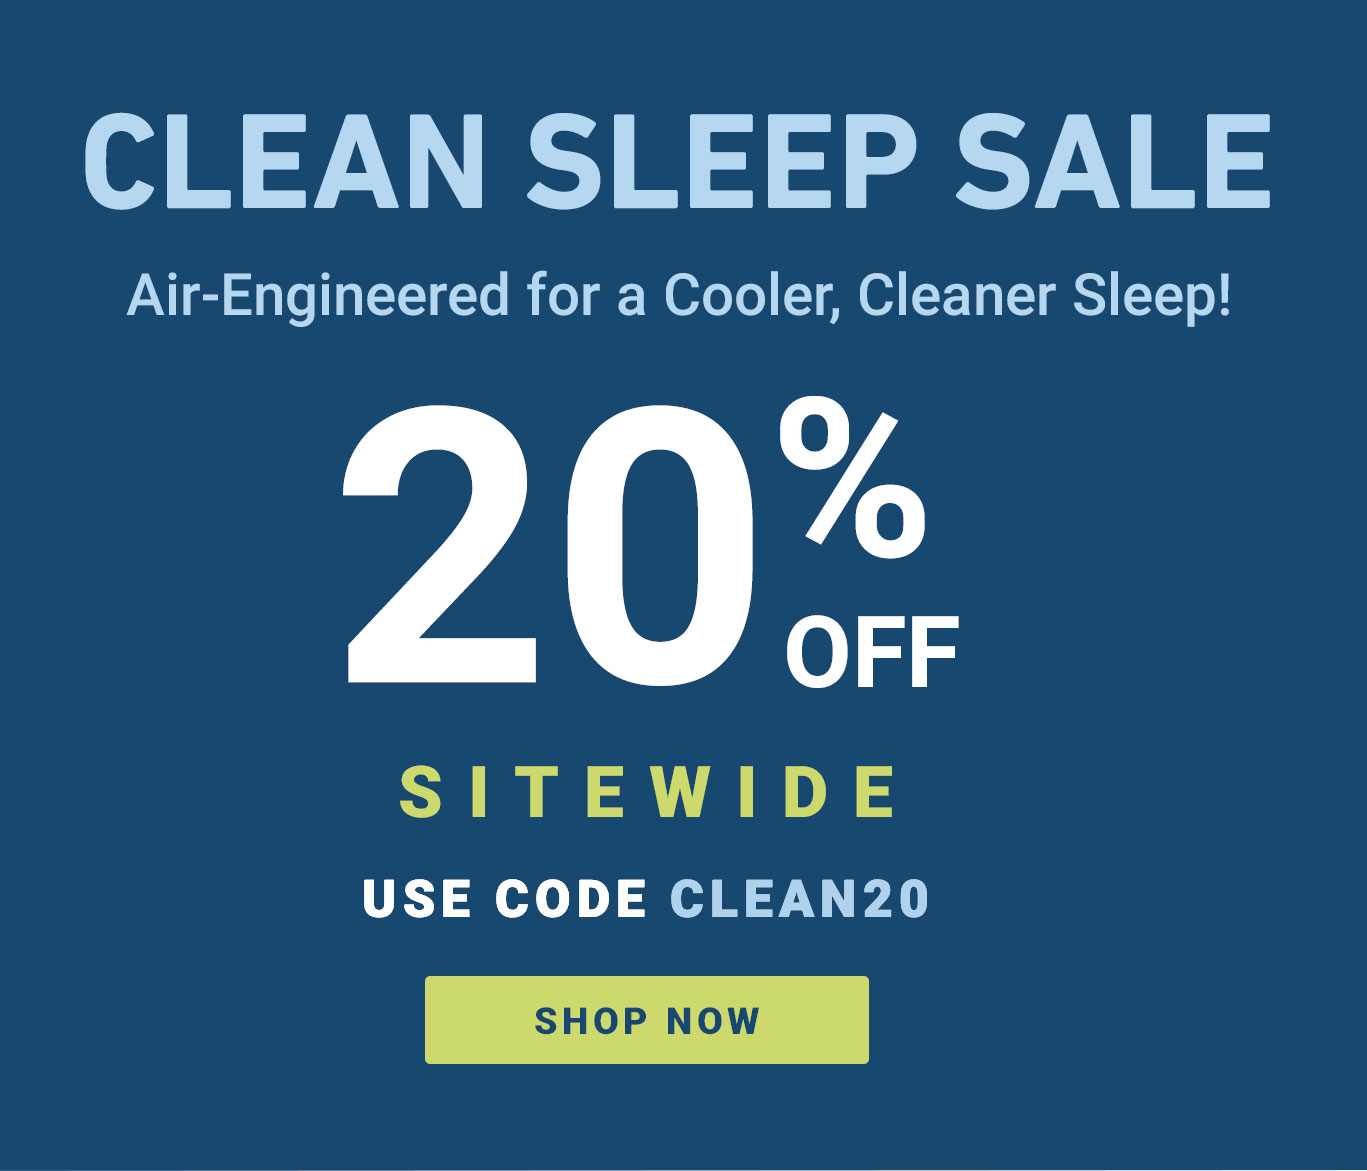 Clean Sleep Sale | Save 20% OFF sitewide with code CLEAN20